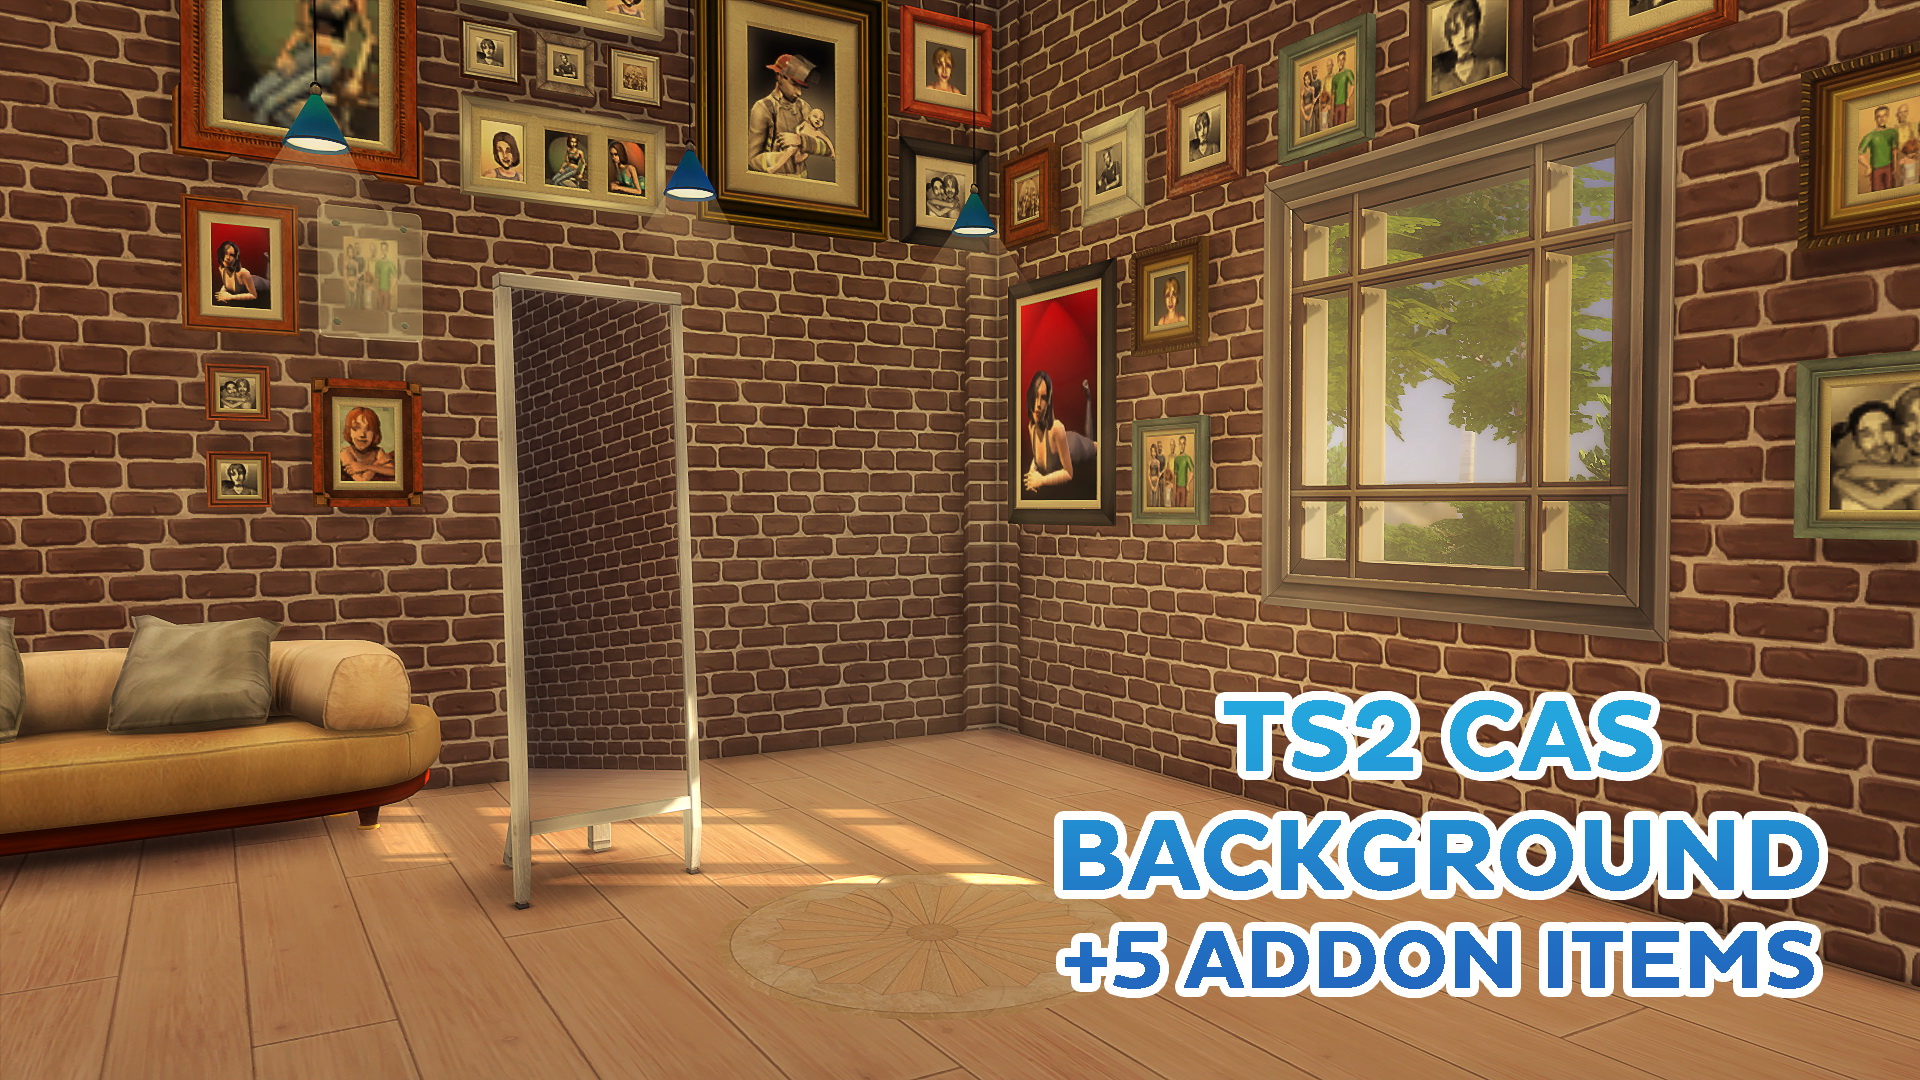 CAS Background Screen by simsi45 from Mod The Sims • Sims 4 Downloads